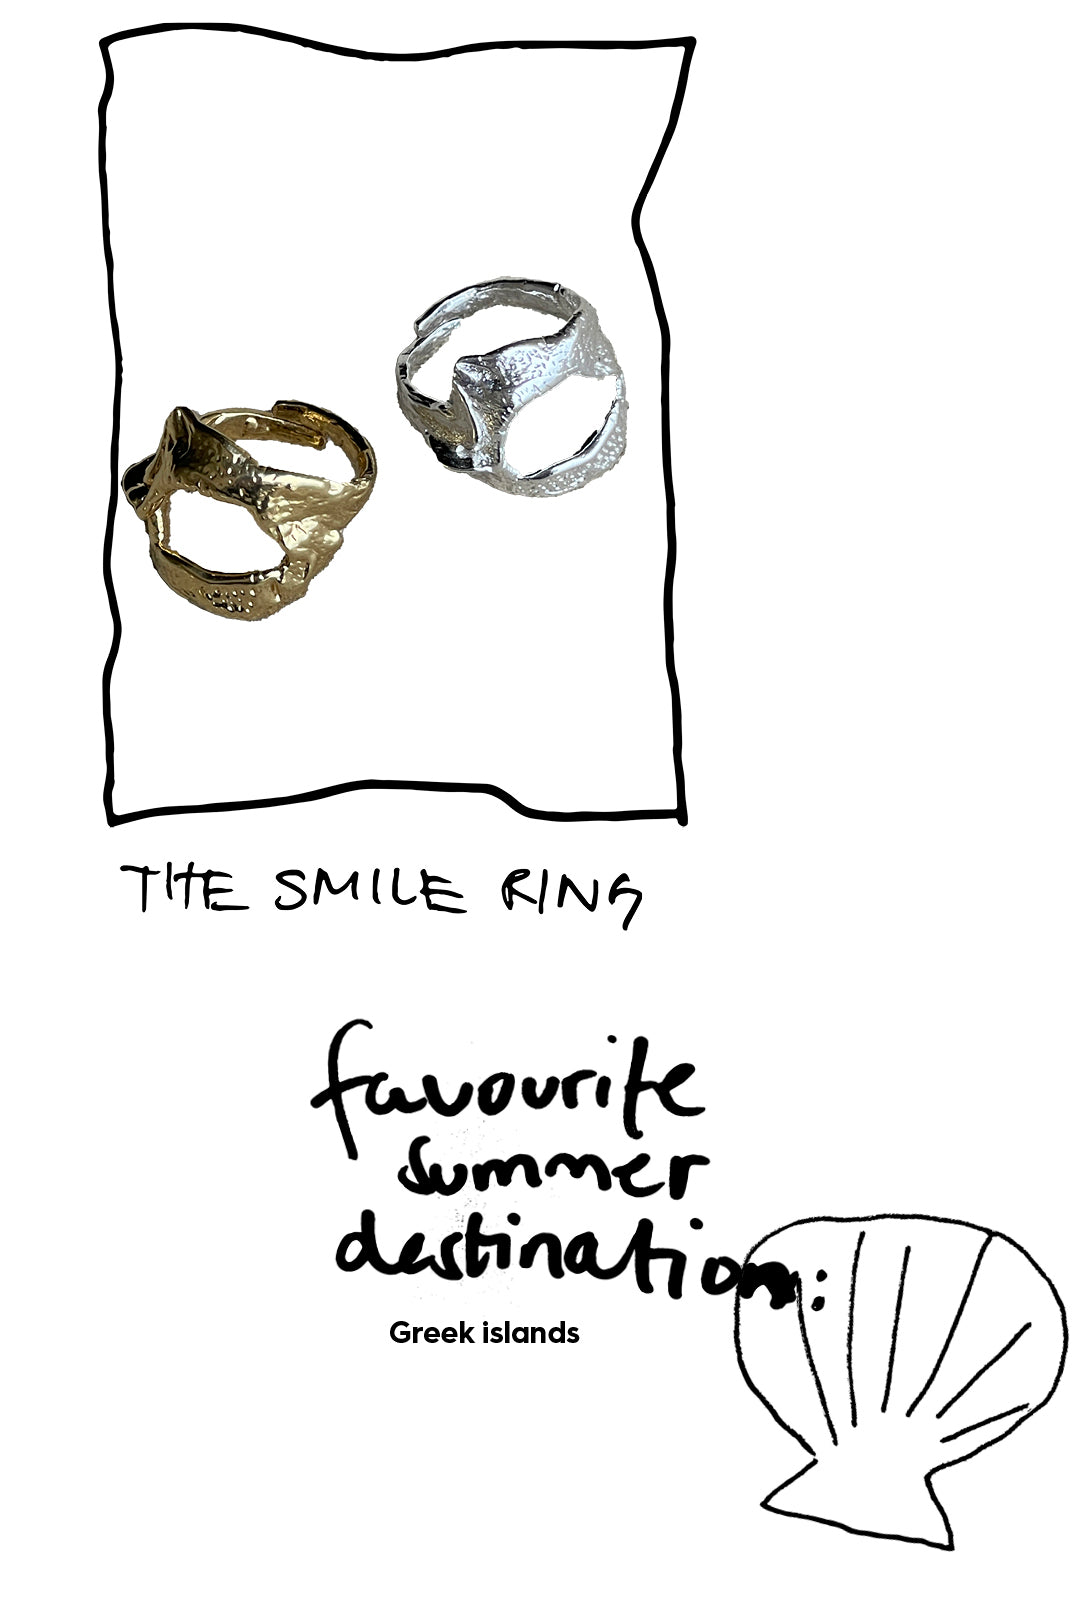 The smile ring